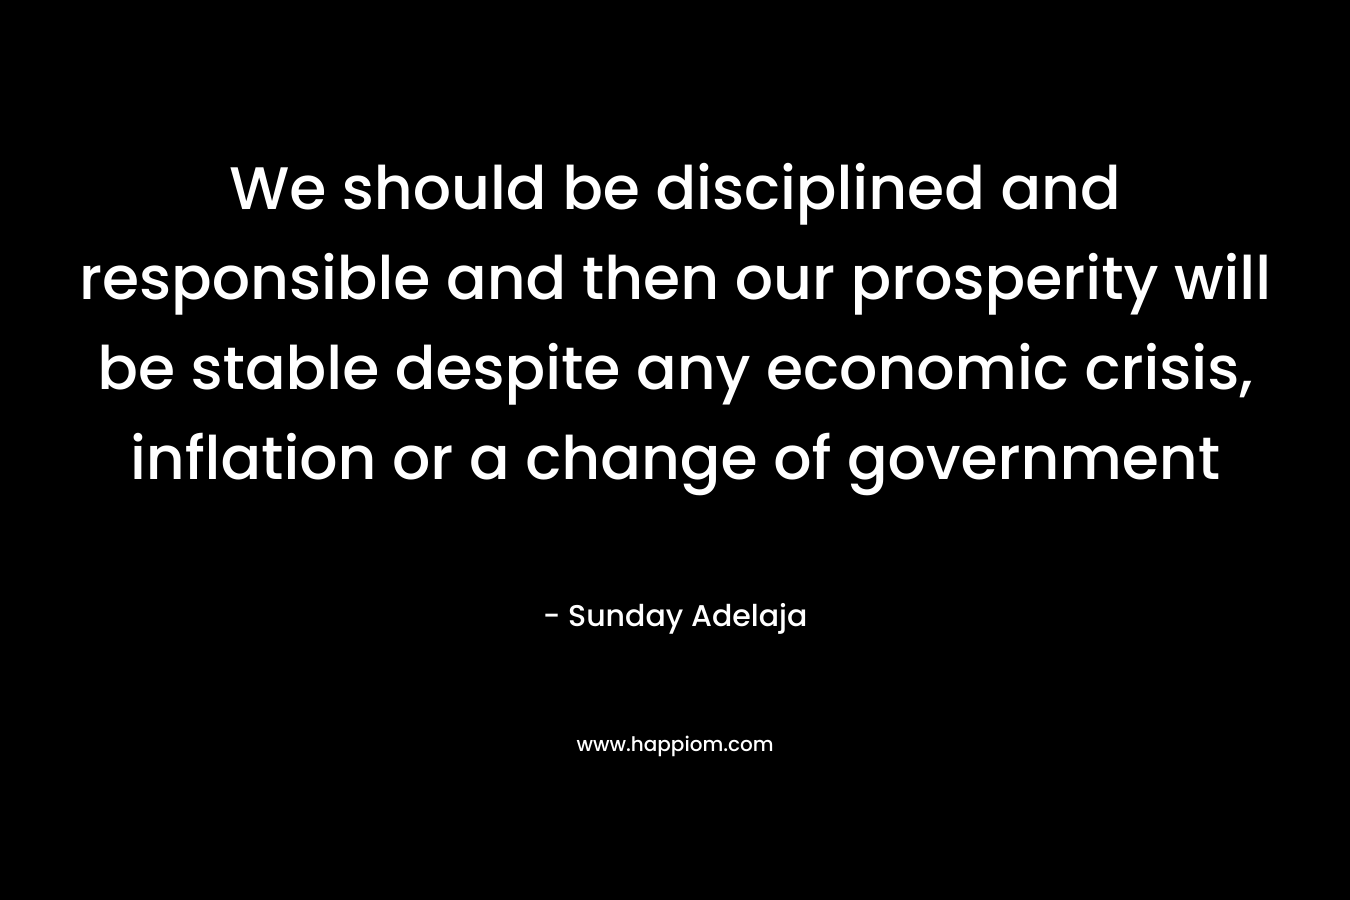 We should be disciplined and responsible and then our prosperity will be stable despite any economic crisis, inflation or a change of government